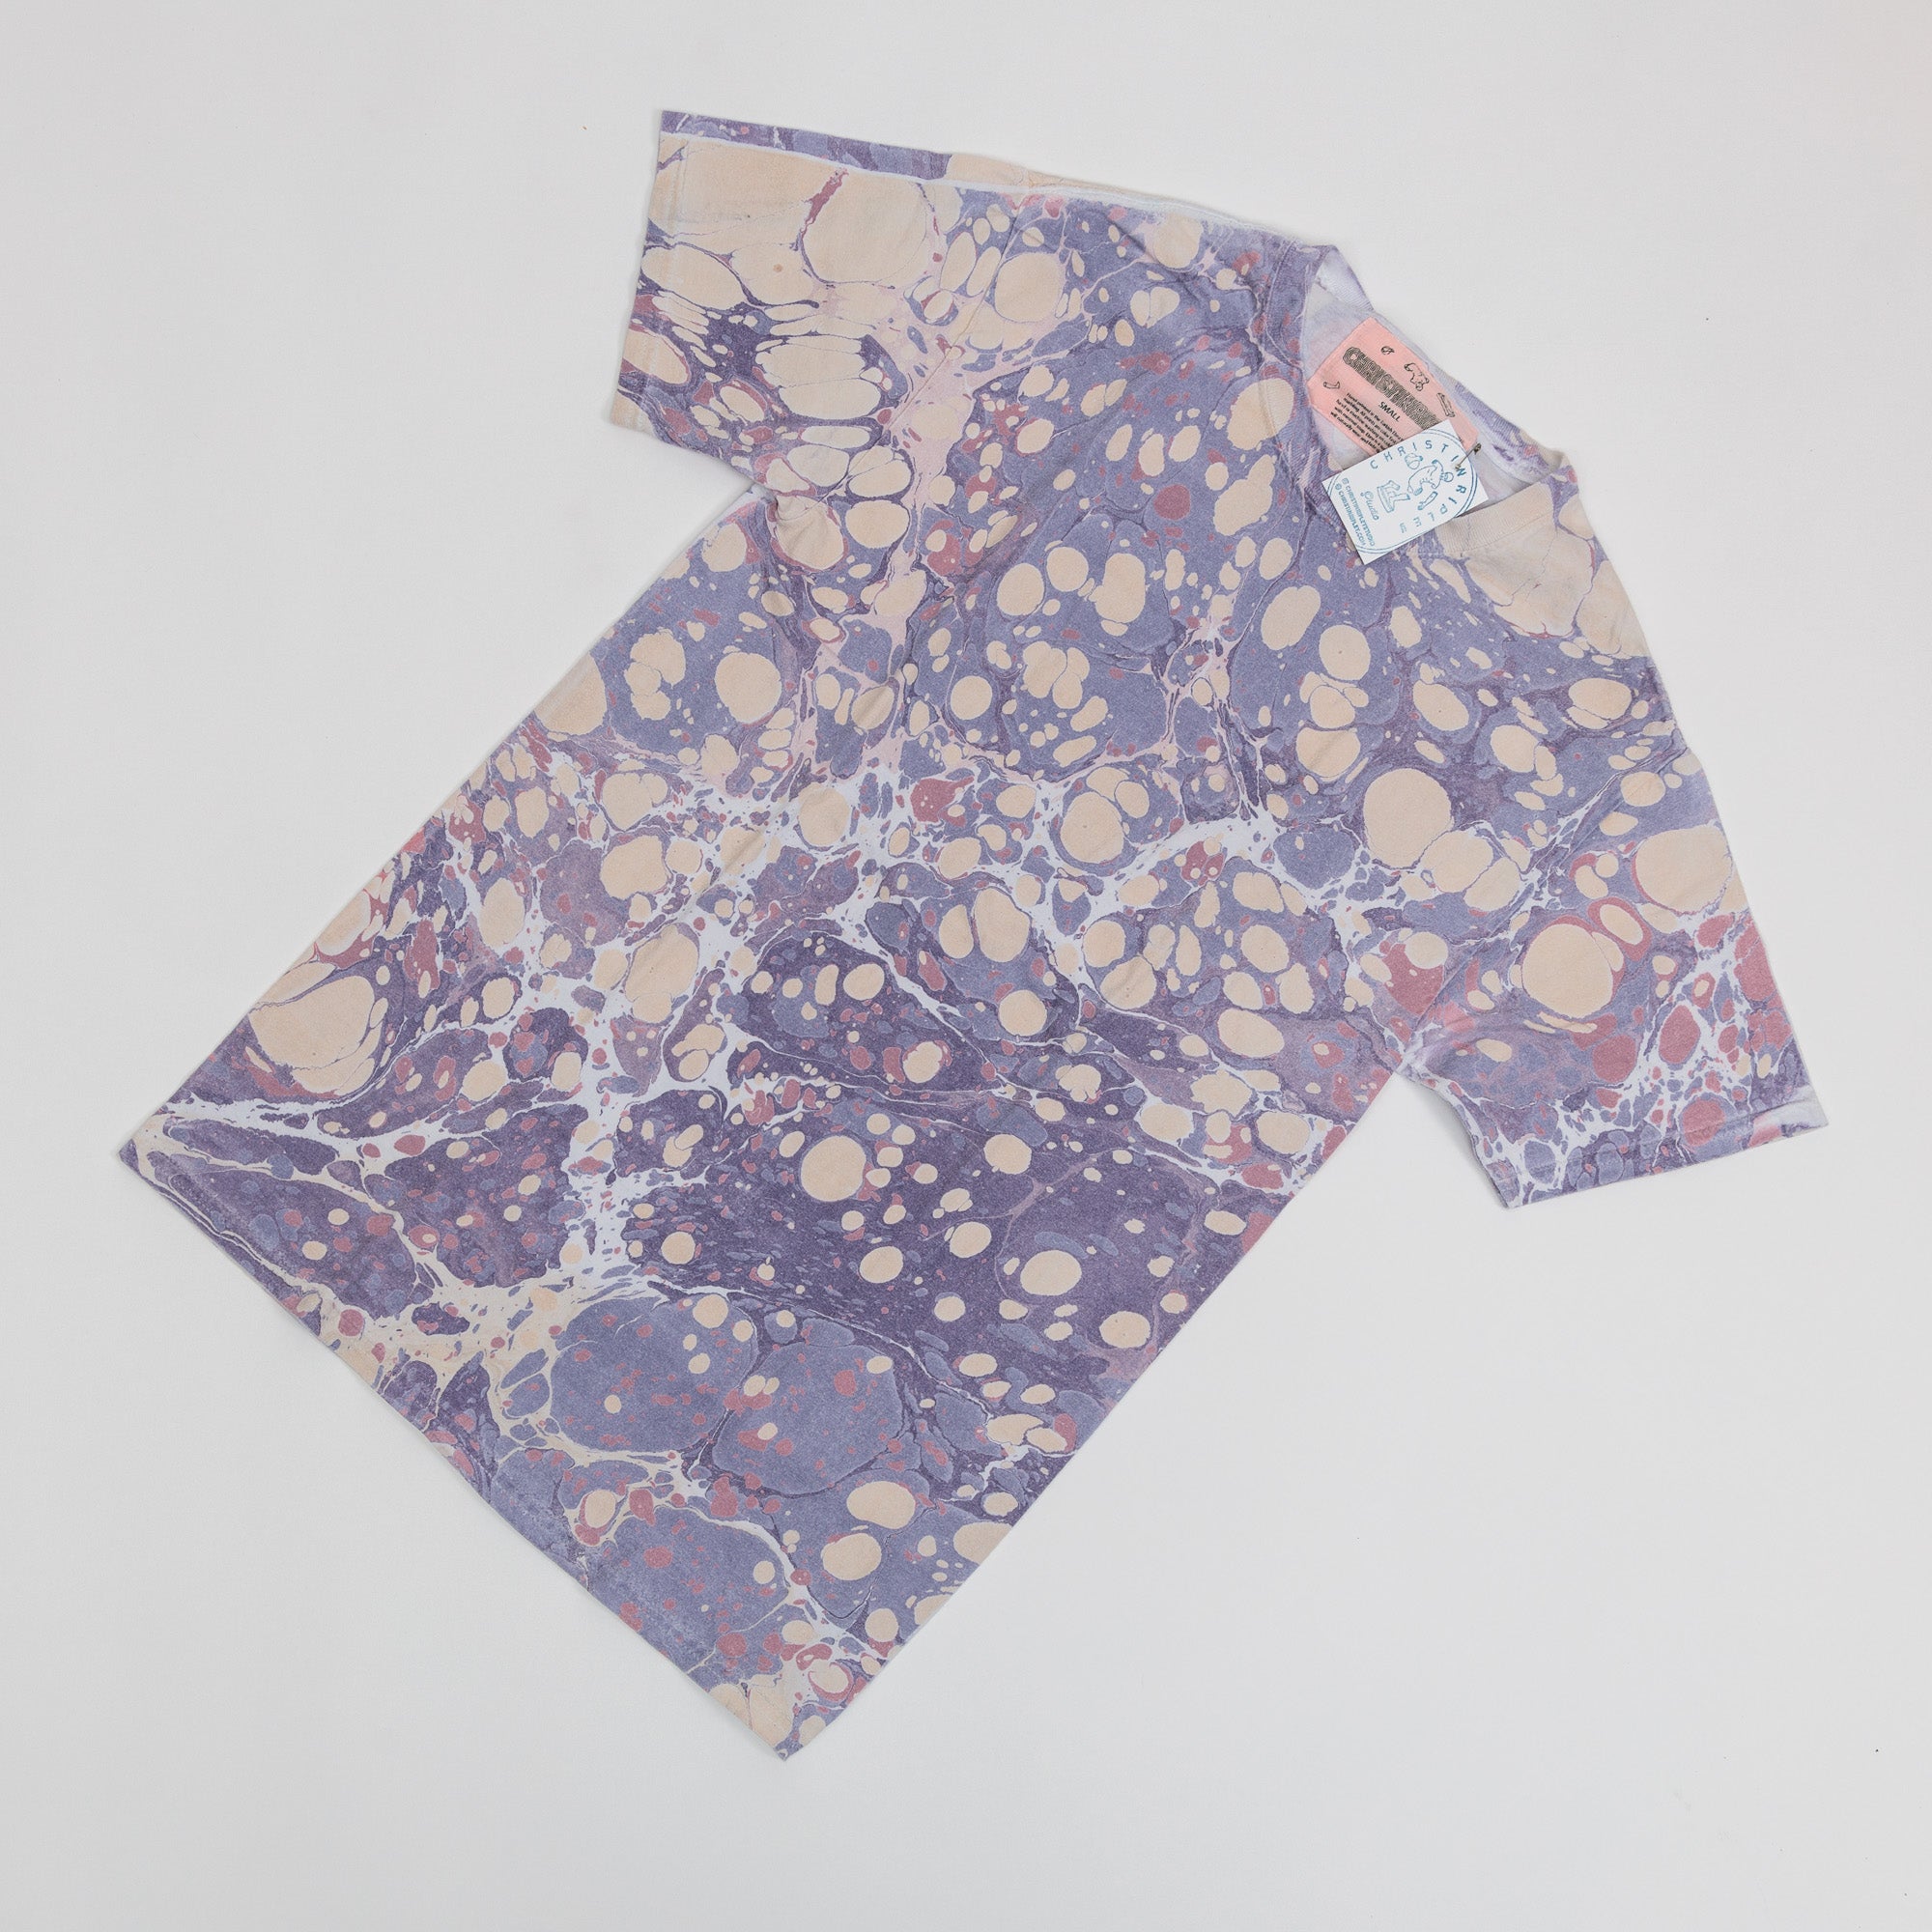 MARBLED T-SHIRT - Adult Small